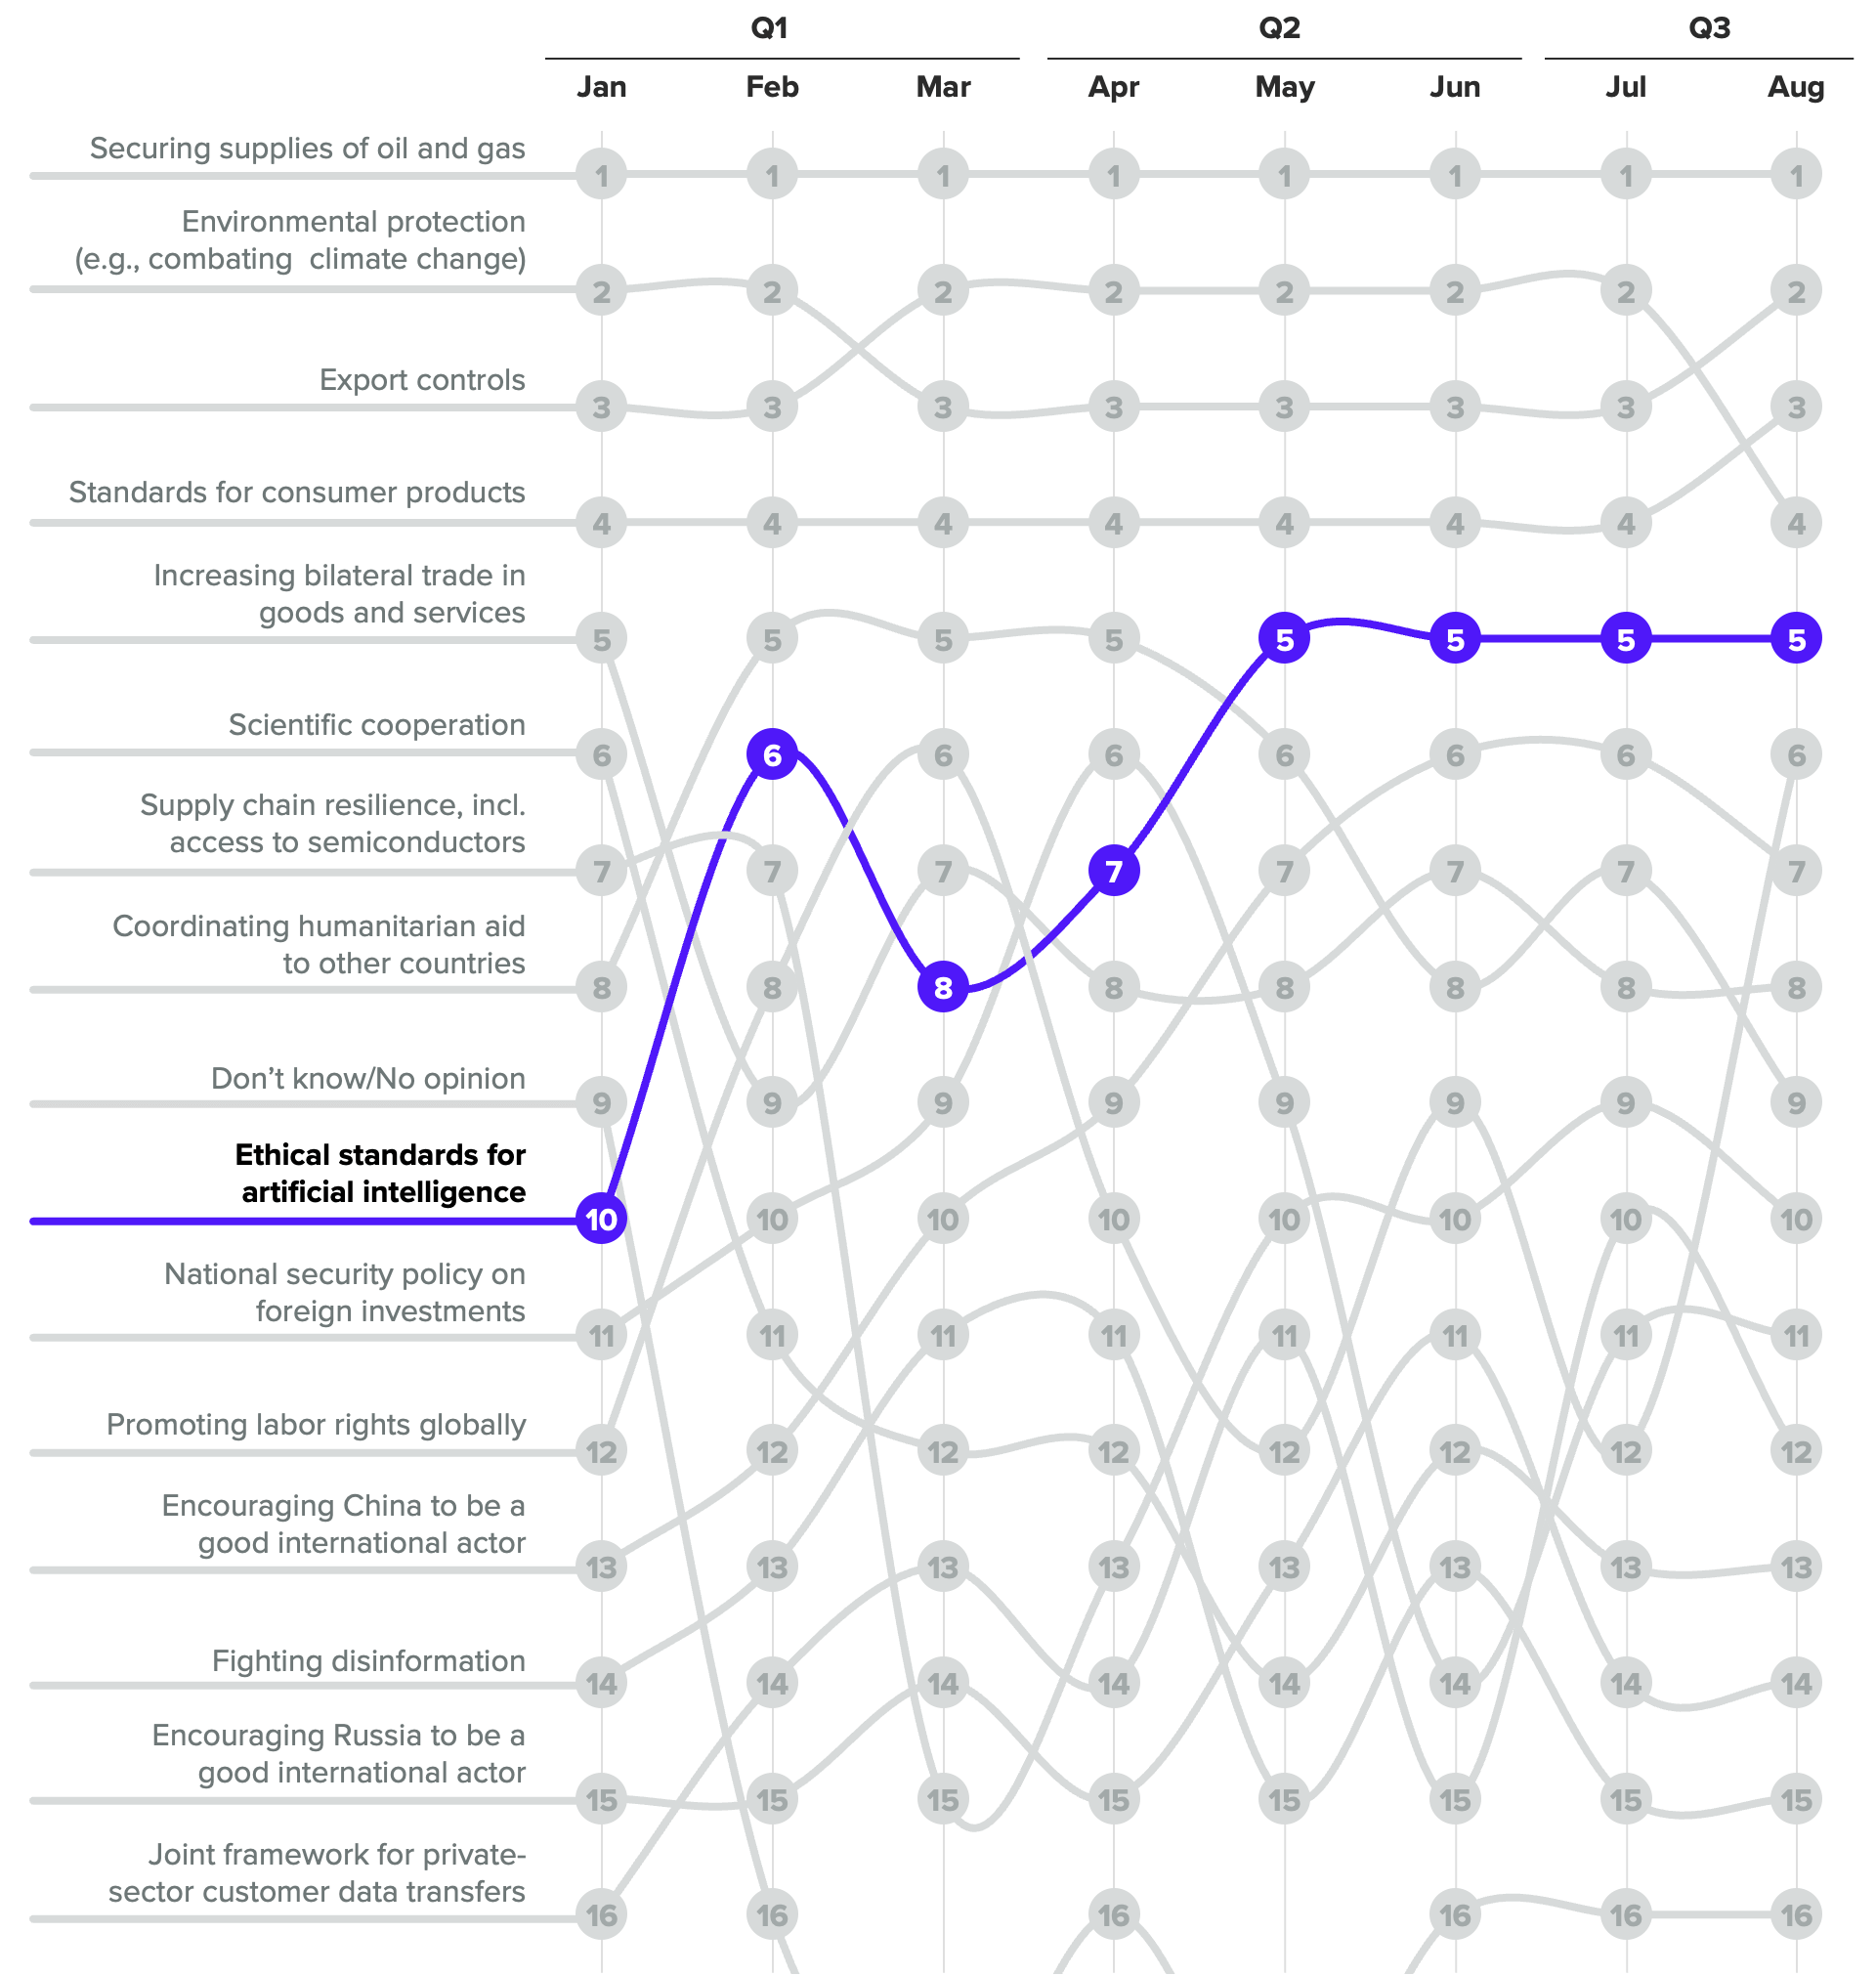 Chart of the rankings of U.S. respondents' top seven priorities for U.S.-E.U. areas of cooperation, showing a rapid rise in the perceived importance of AI ethics.